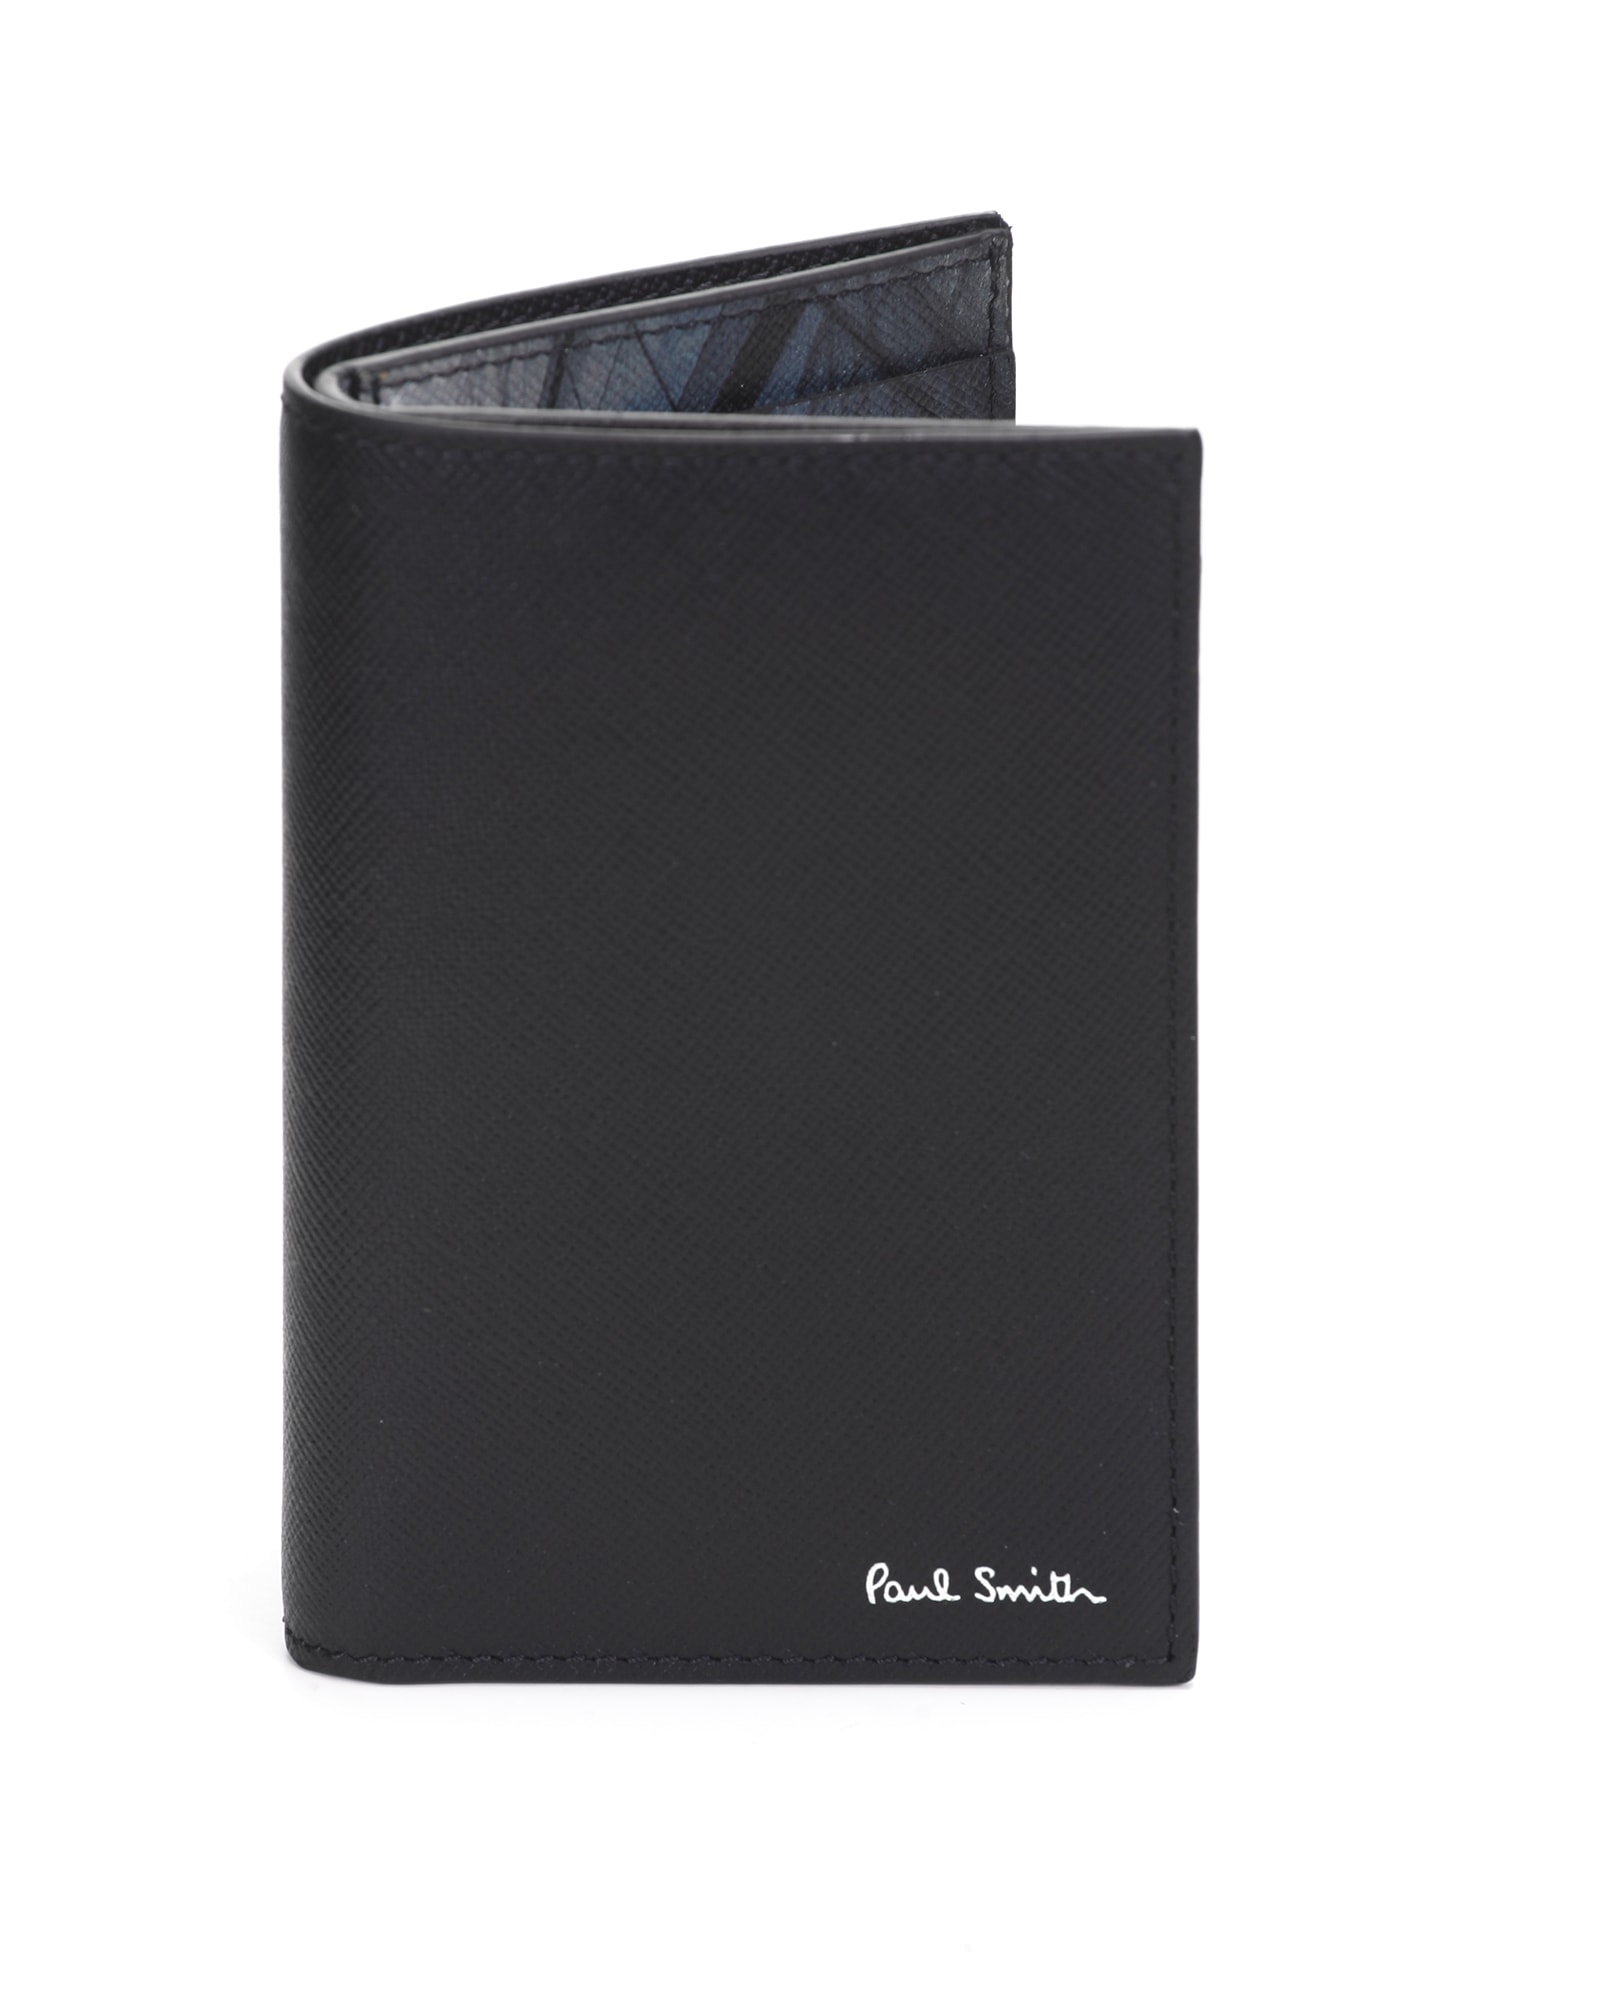 Paul Smith credit card wallet